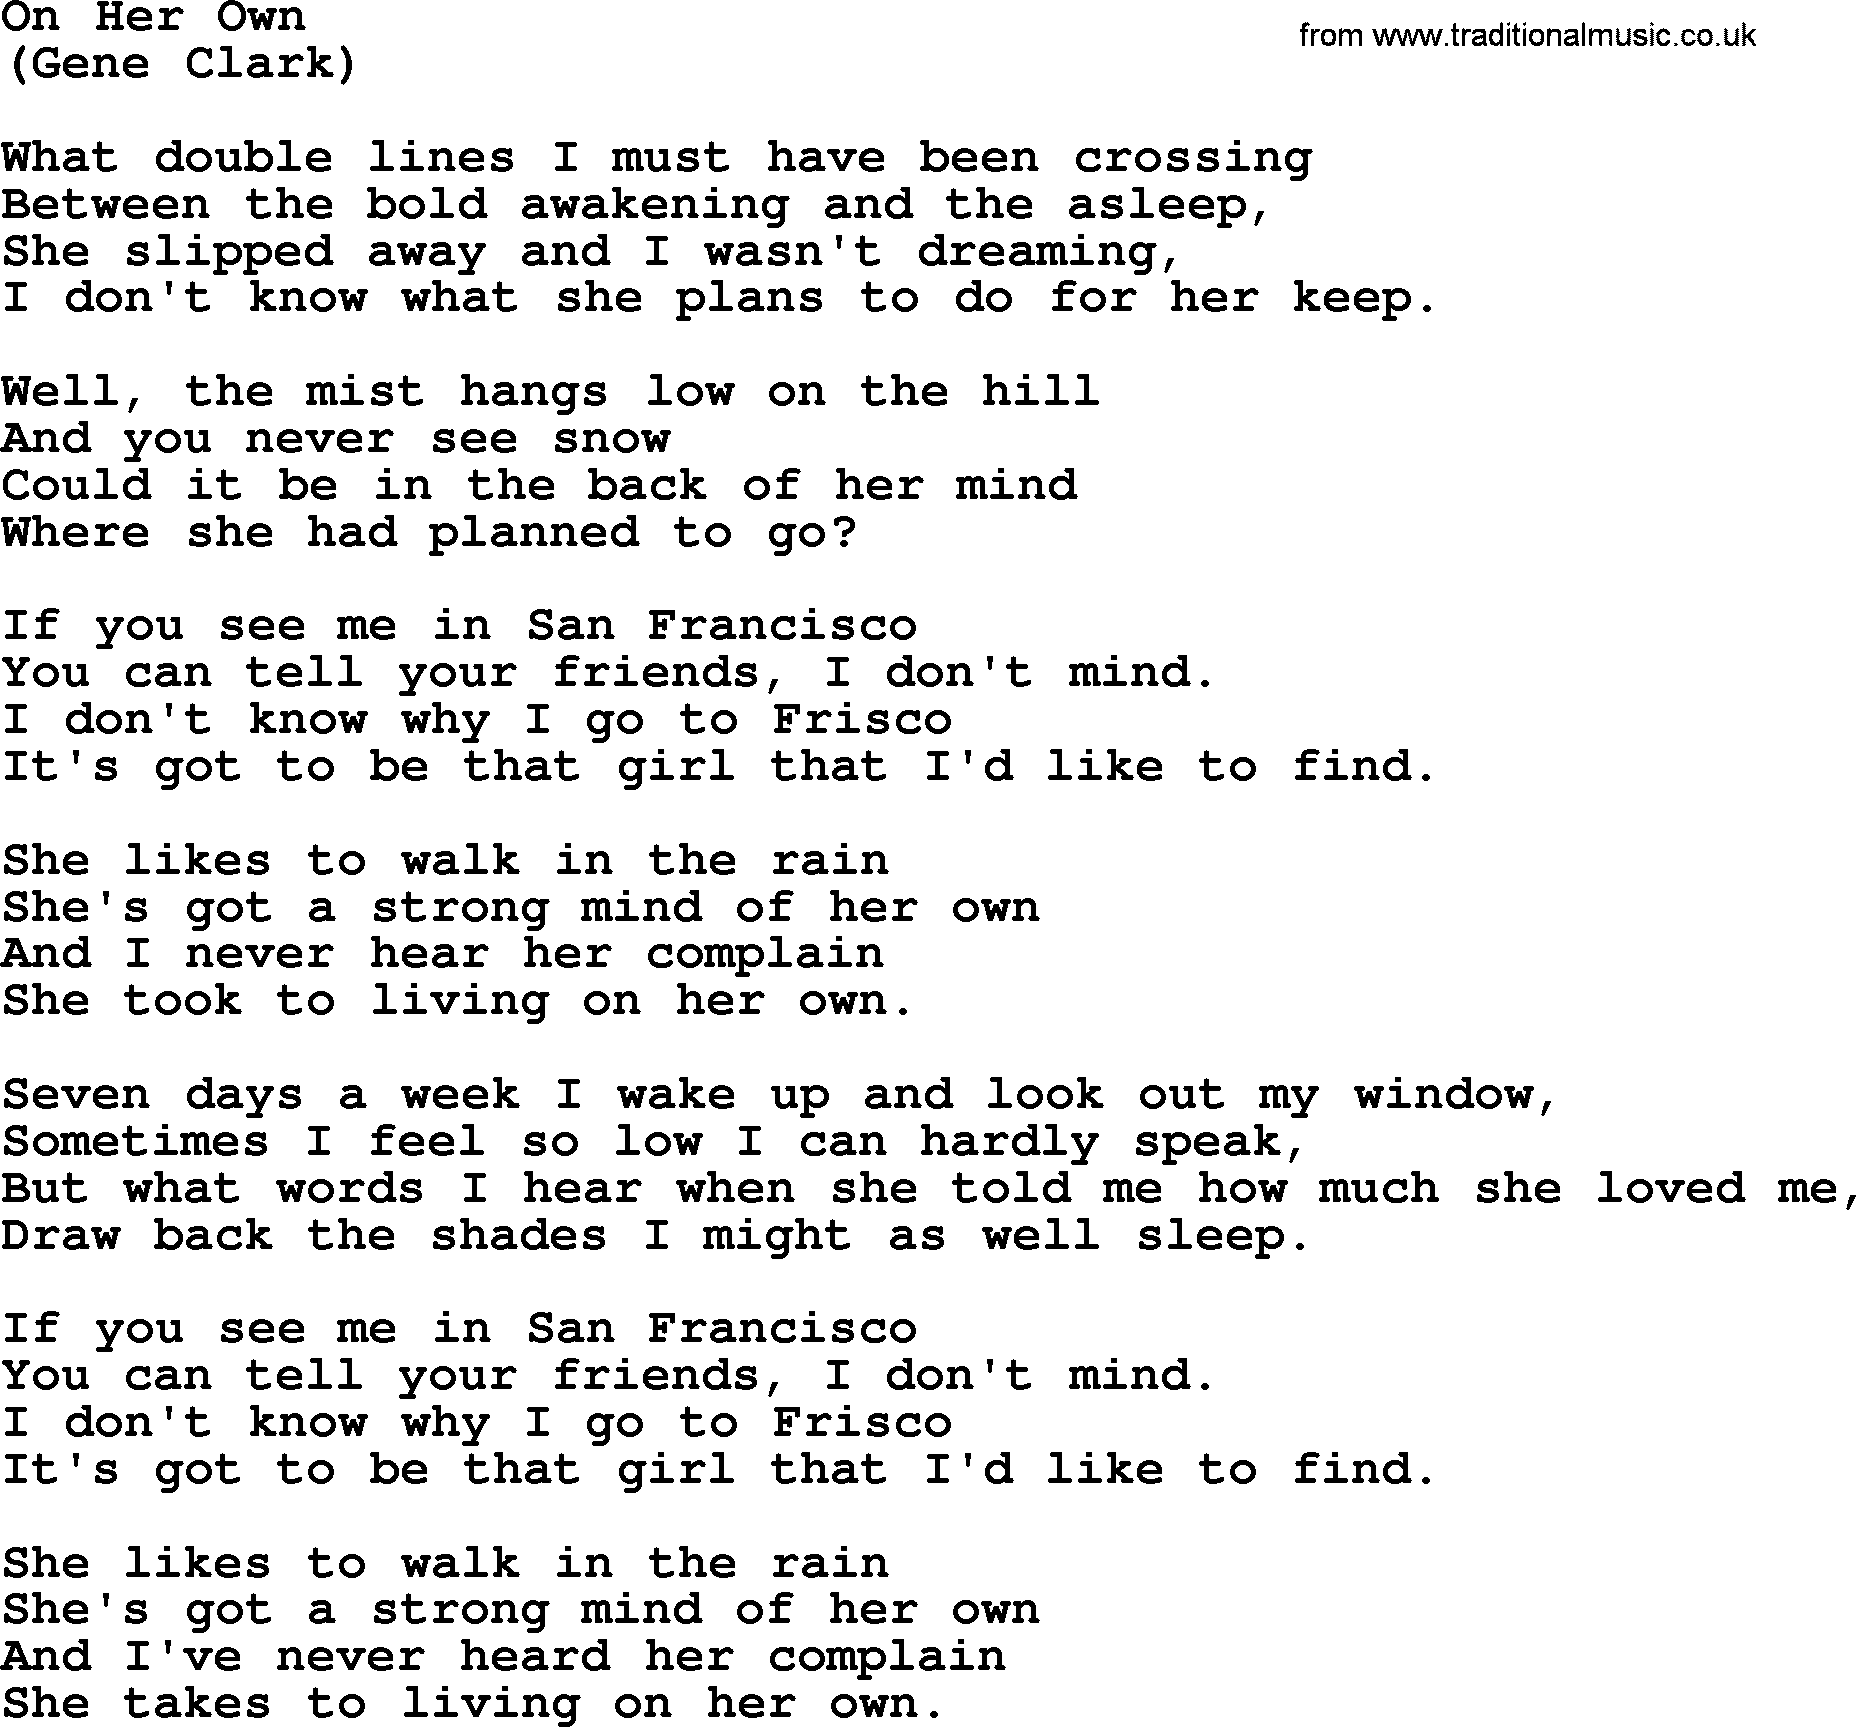 The Byrds song On Her Own, lyrics